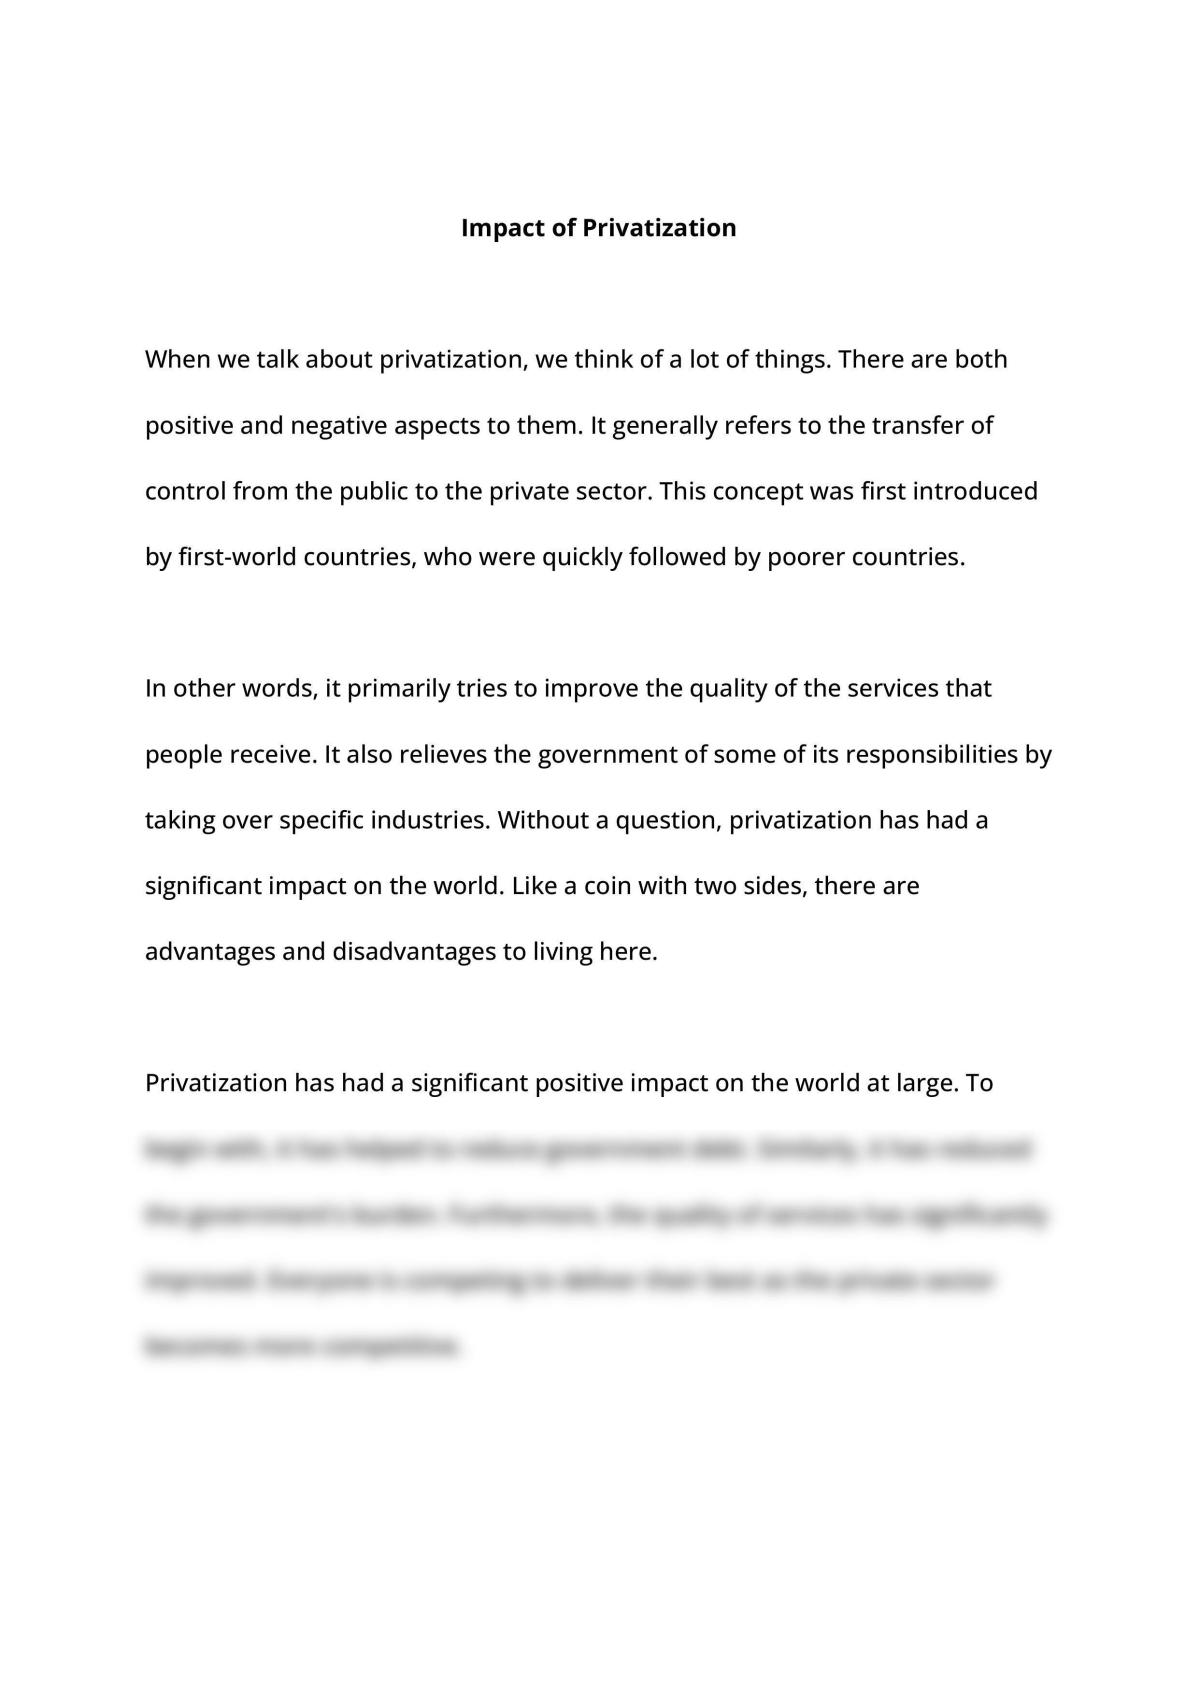 Essay Discussing Impact of Privatization - Page 1